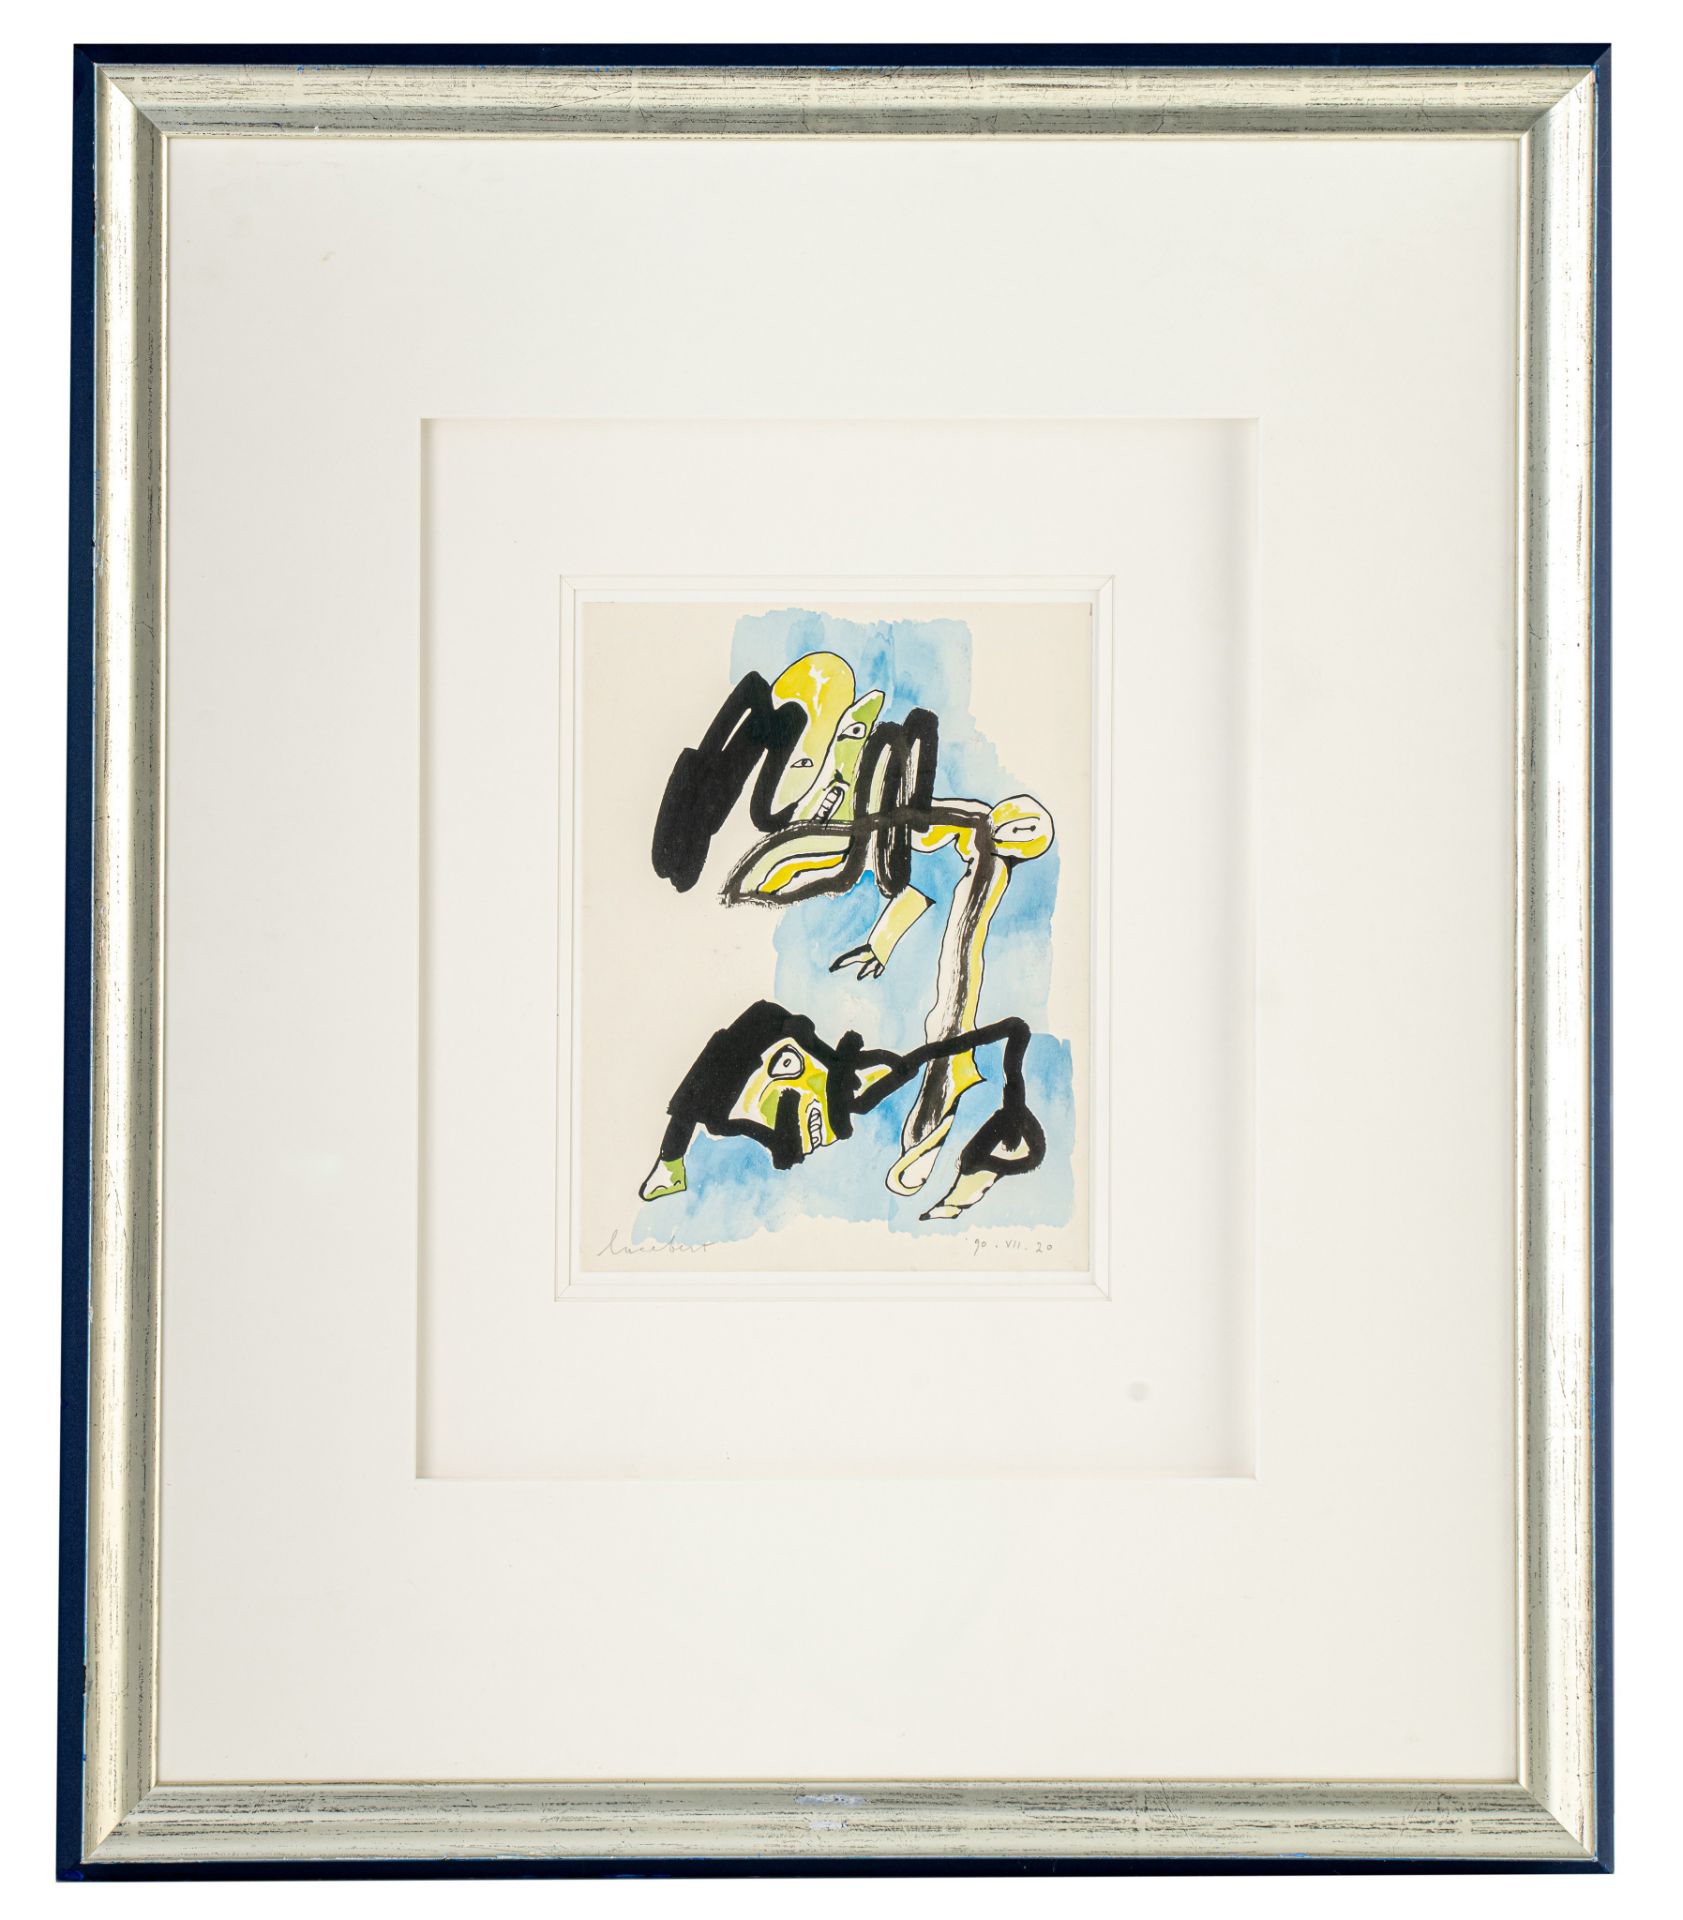 Lucebert (1924-1994), untitled, 1990, ink and watercolour, 23 x 30 cm - Image 2 of 5